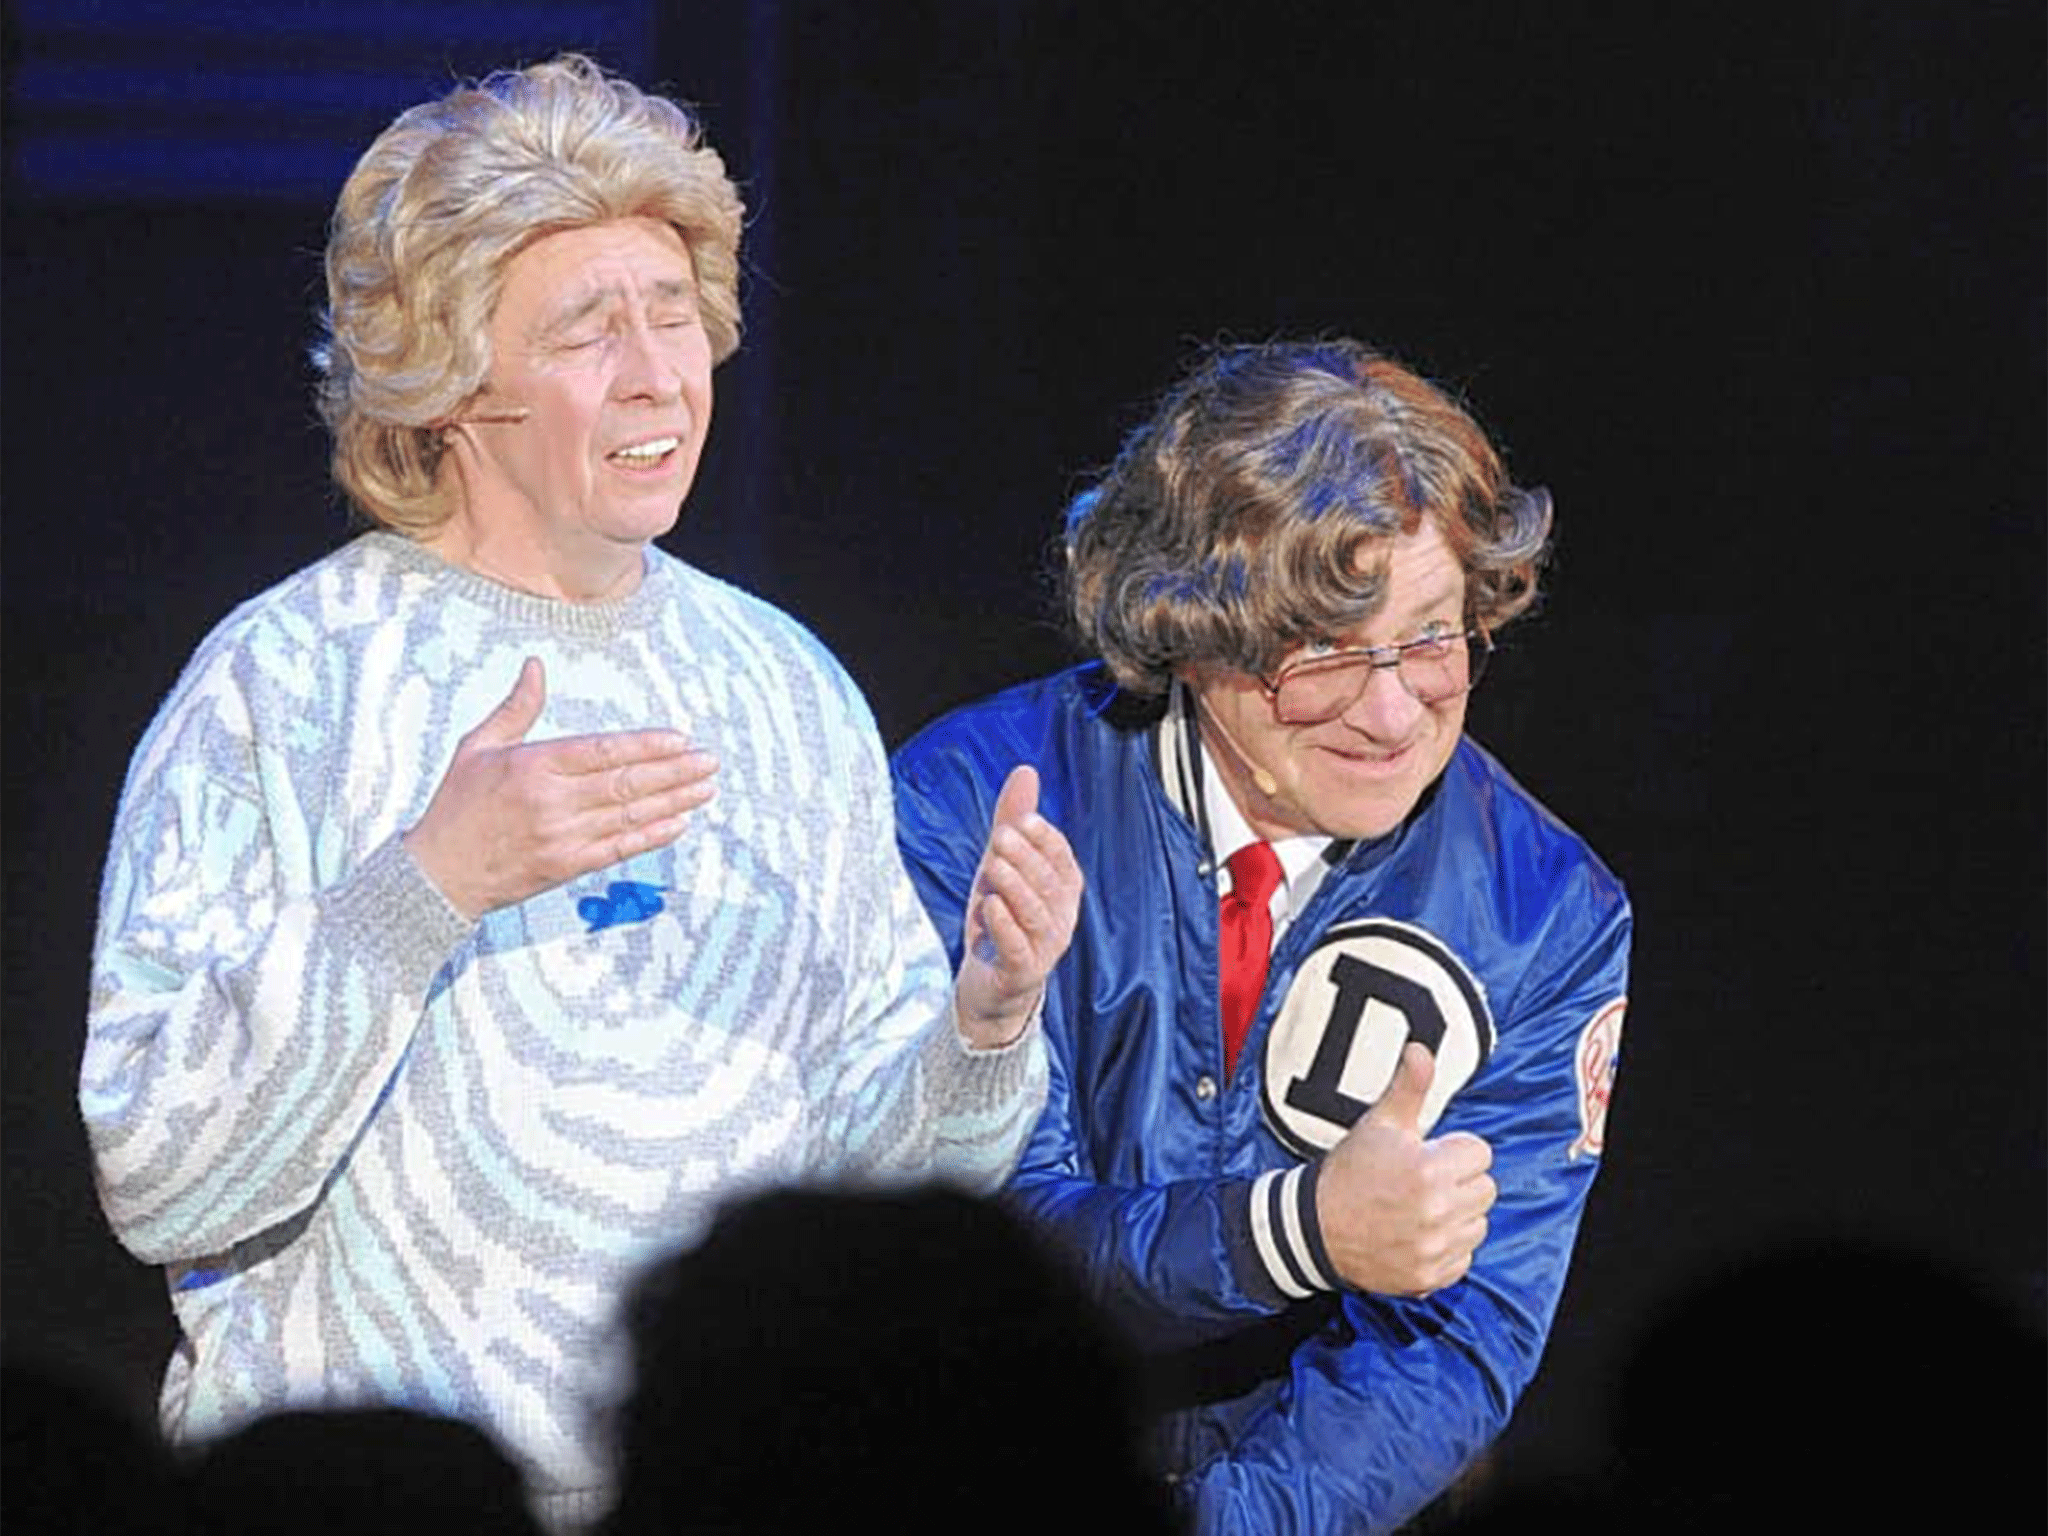 Smashie hit: Paul Whitehouse and Harry Enfield